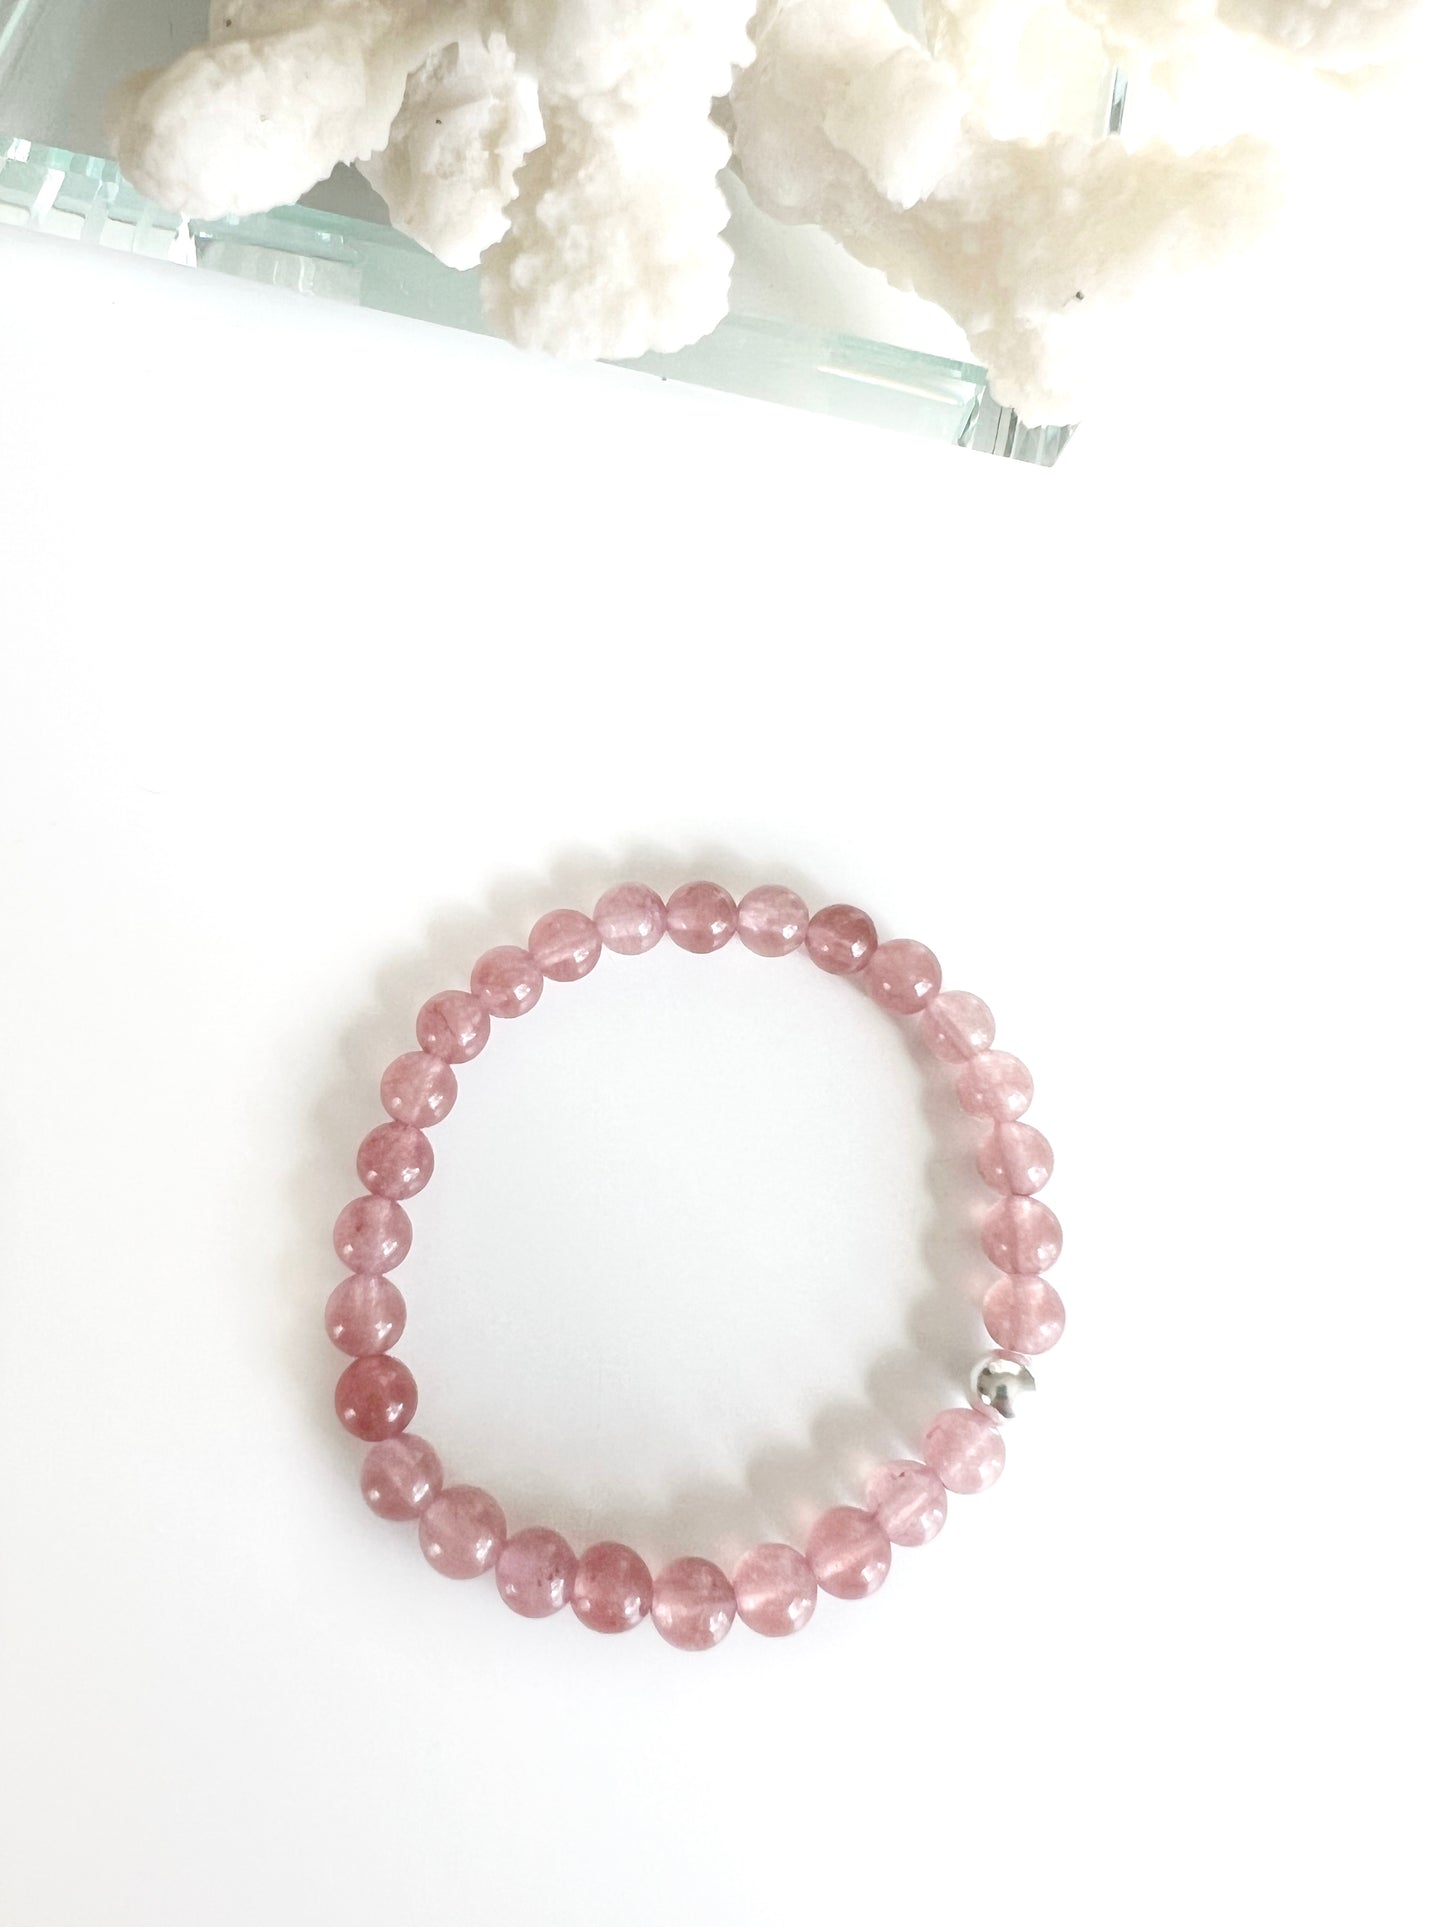 Strawberry Quartz stretch bracelet with one silver bead. Each bead is dark translucent pink. There's part of a white coral behind it.